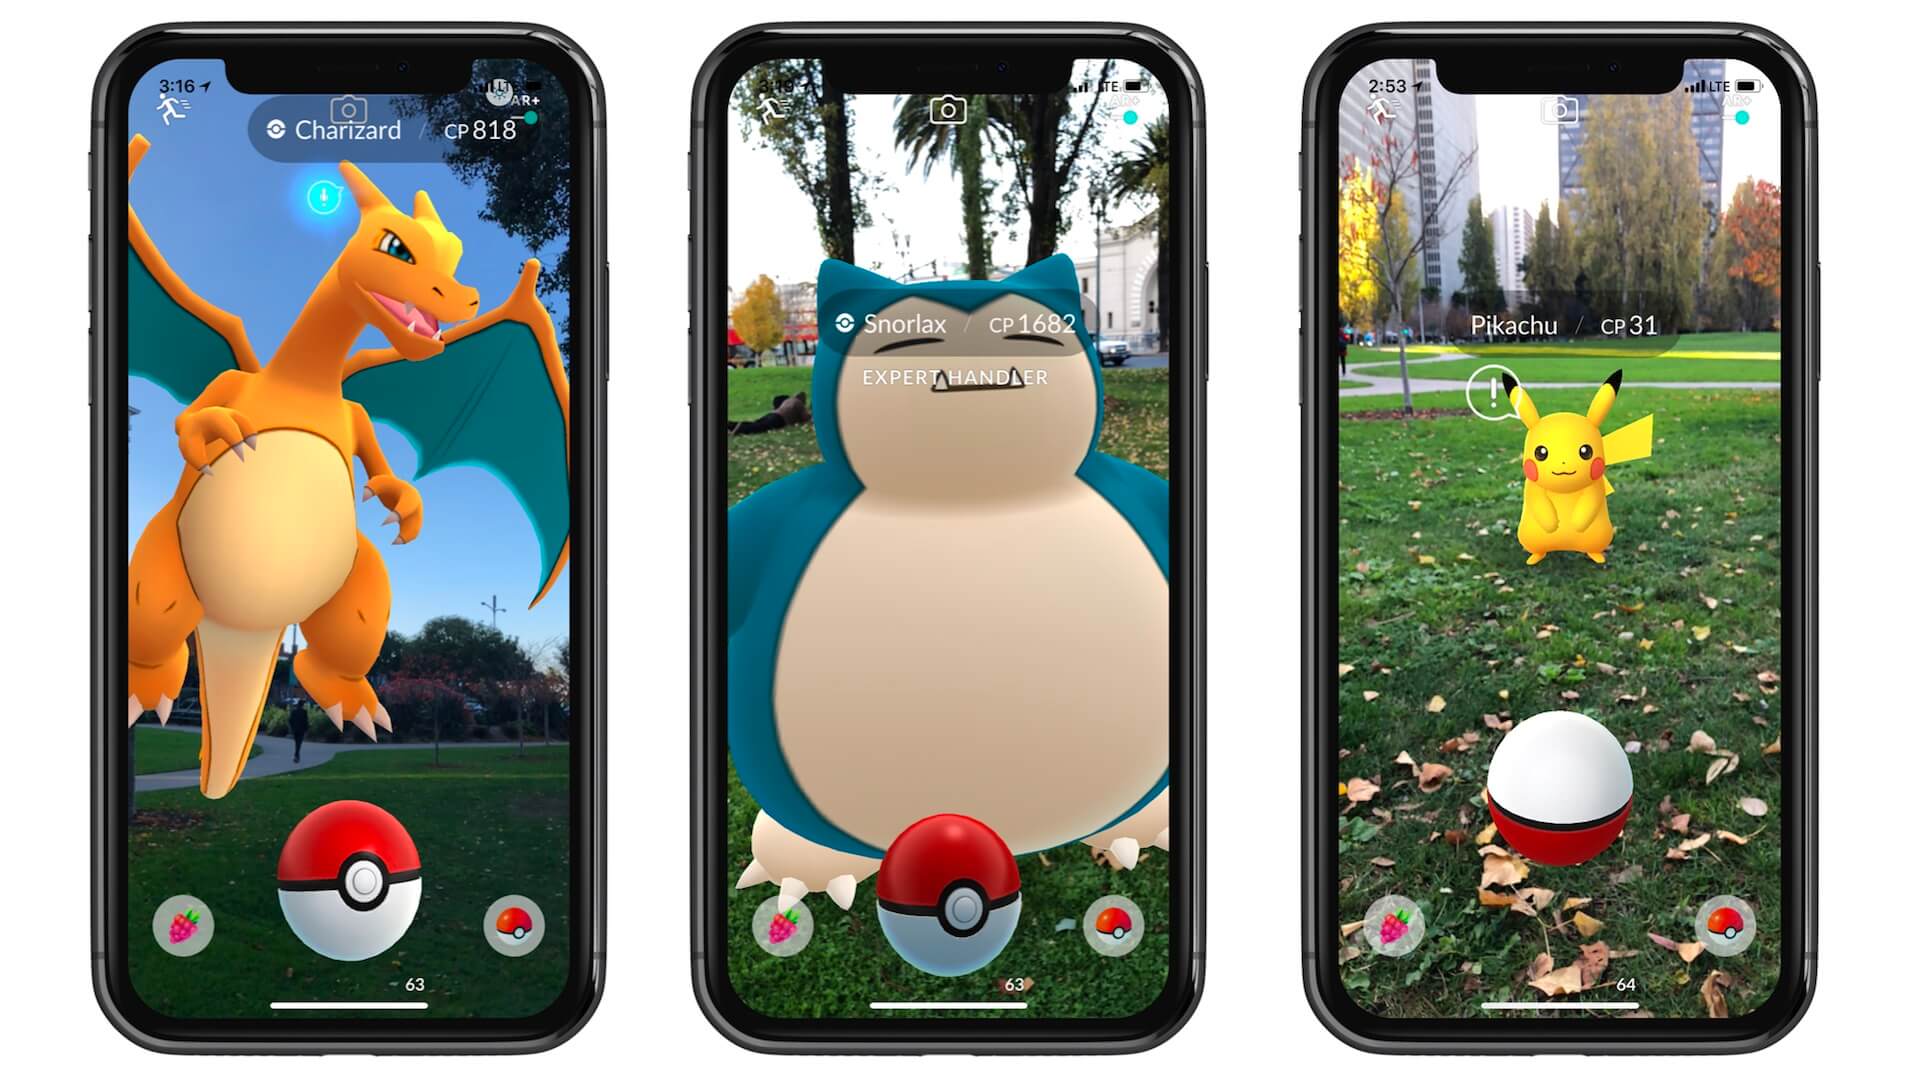 Figure 41.1. Pokemon Go with AR enabled (images from Niantic Labs)